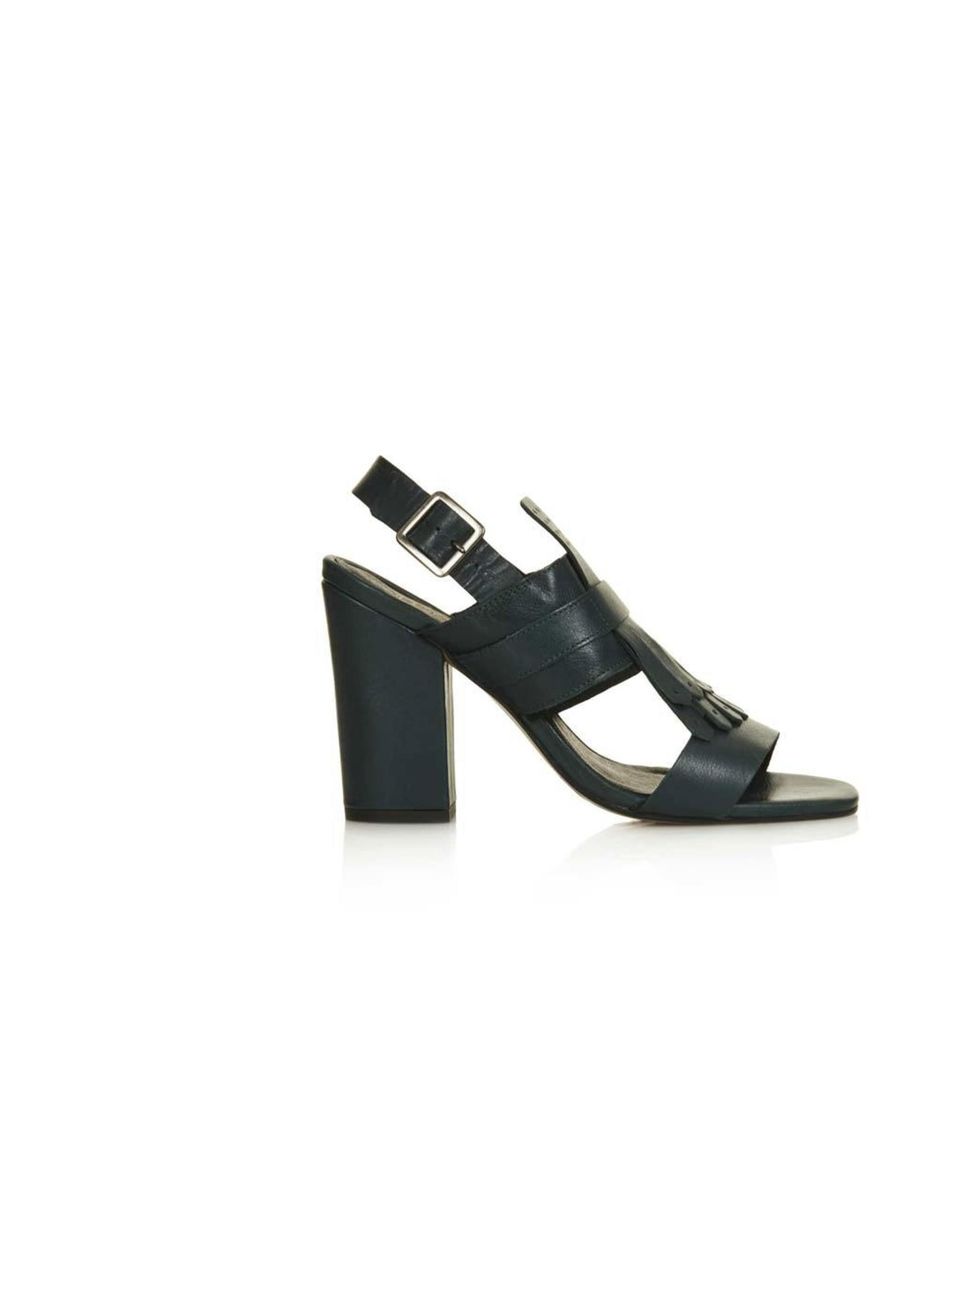 <p>These are so versatile, they'll go with everything! </p><p>- Amy Lawrenson, Senior Beauty Writer</p><p><a href="http://www.topshop.com/en/tsuk/product/shoes-430/heels-458/rescue-fringe-sandals-2181349?bi=1&ps=200">Topshop</a> sandals, £68</p>